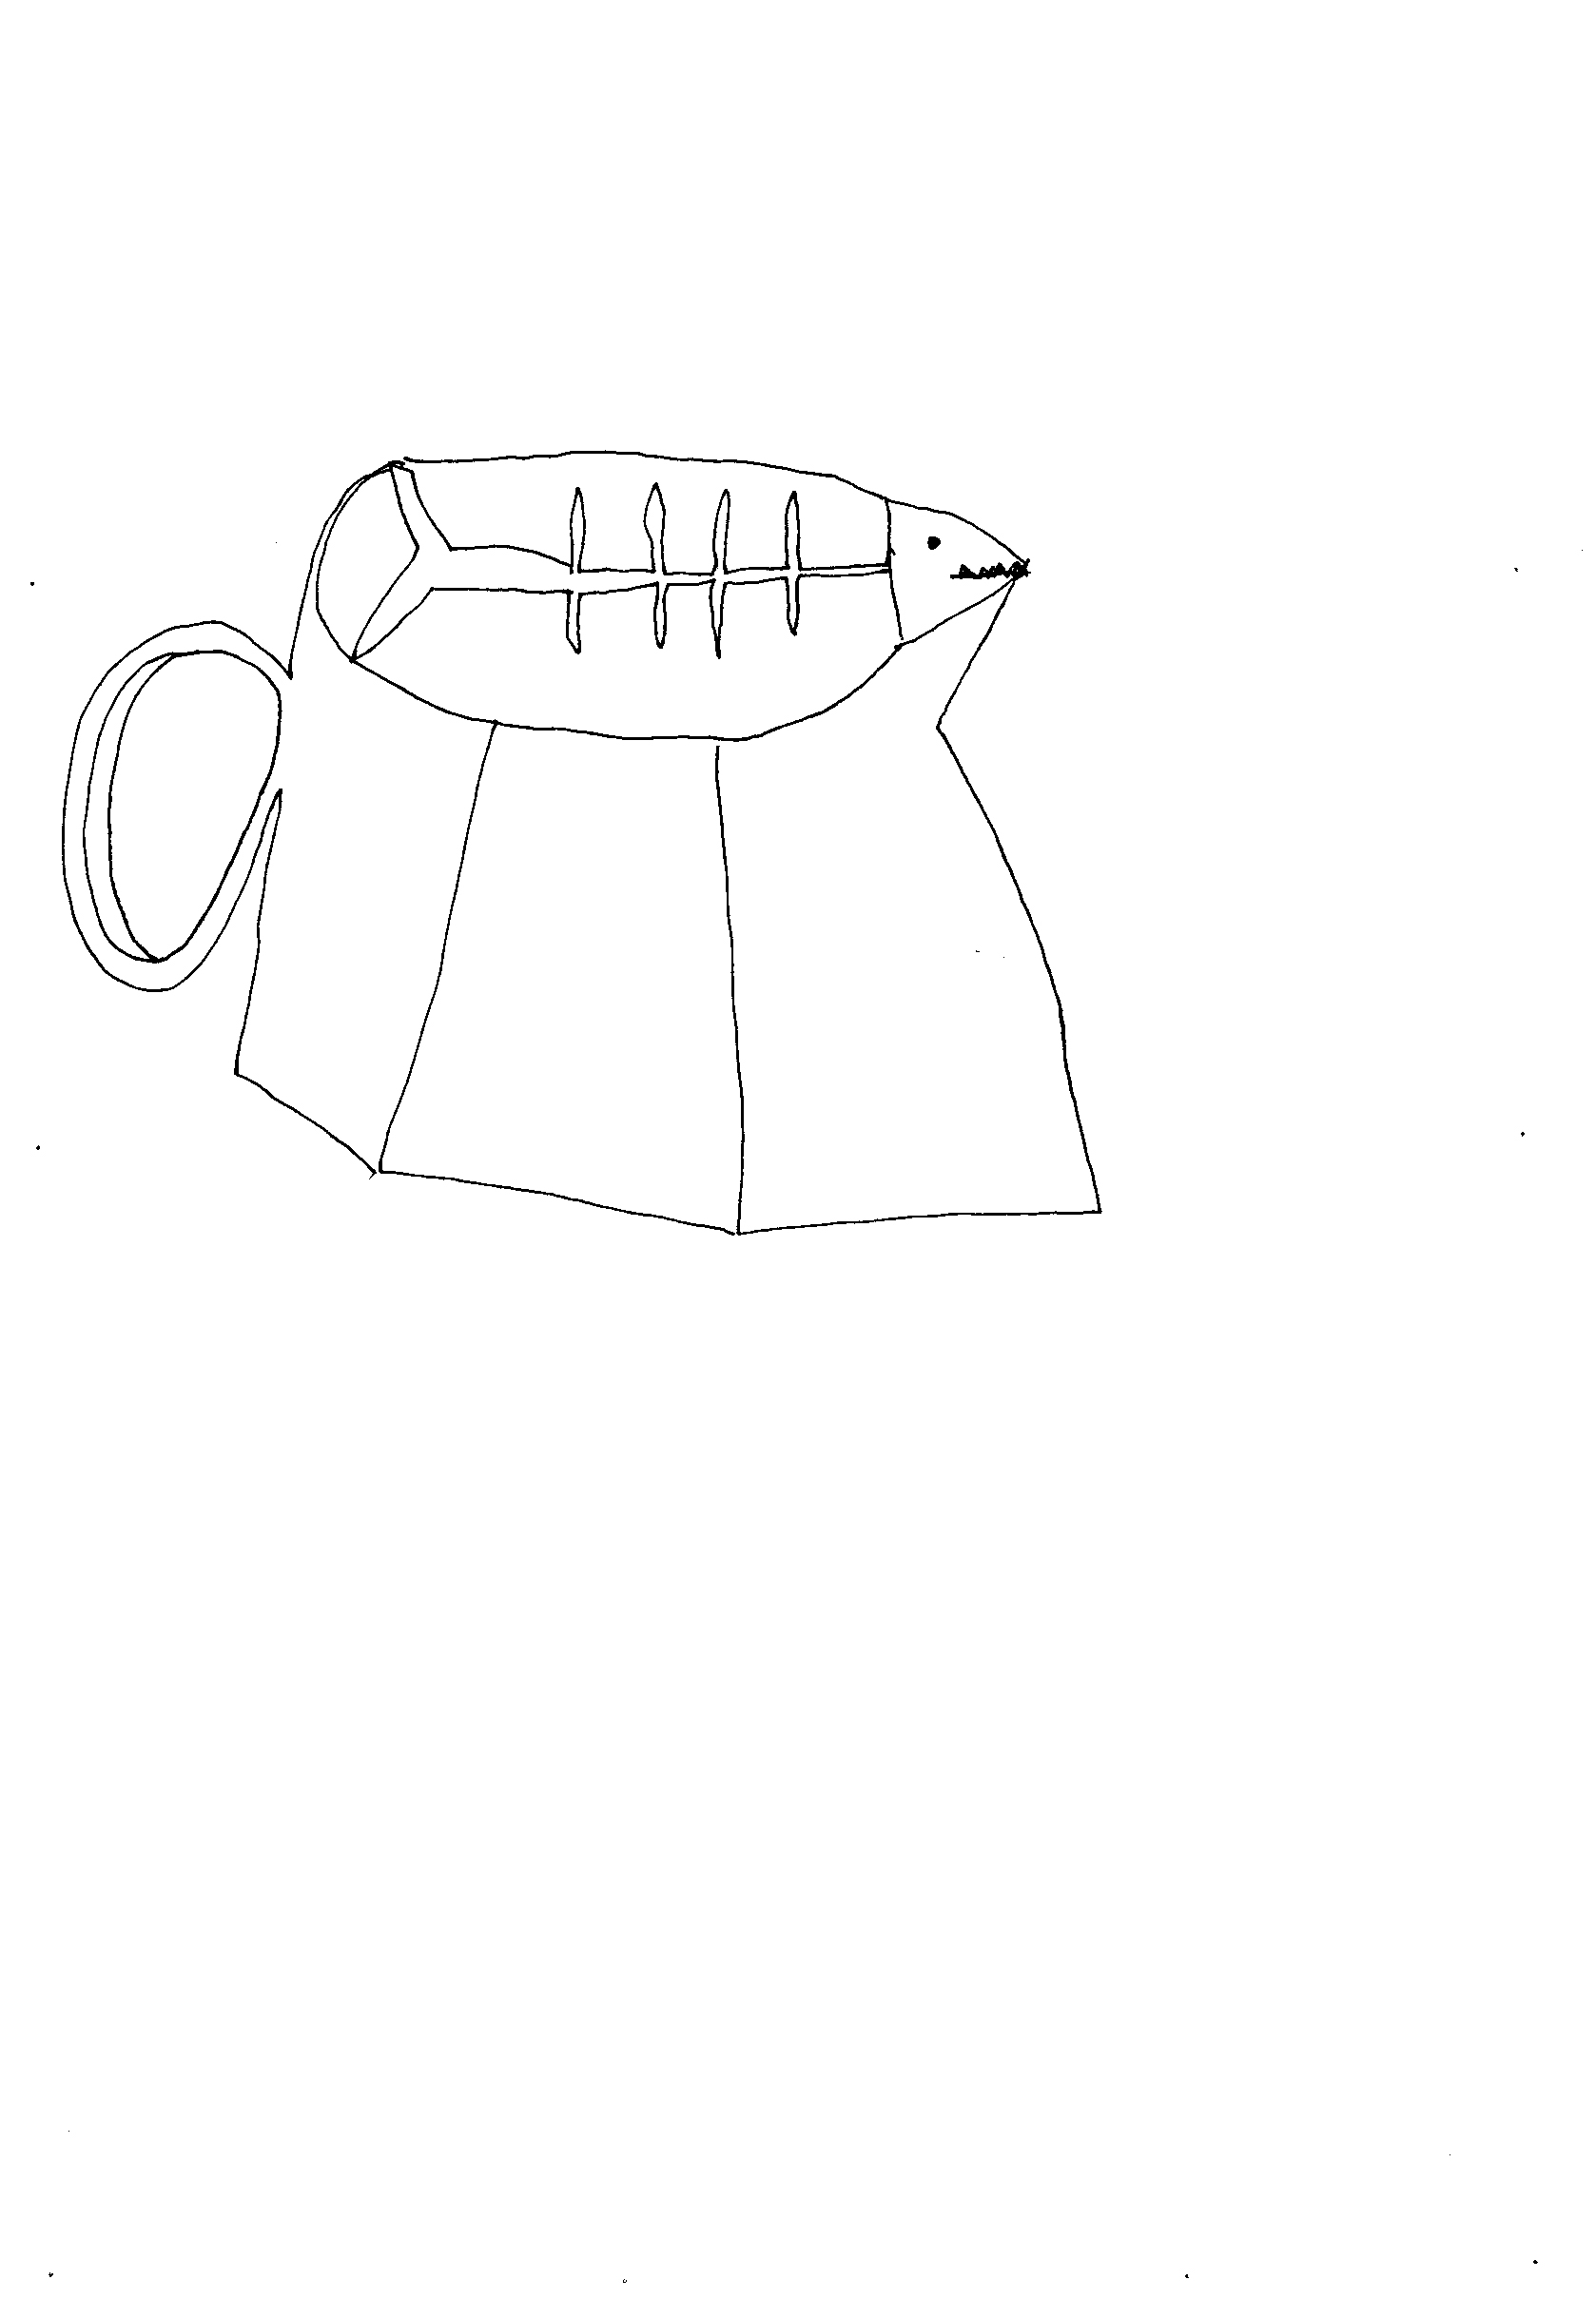 line drawing in black on white of a fish-skeleton in the rim of a small pitcher